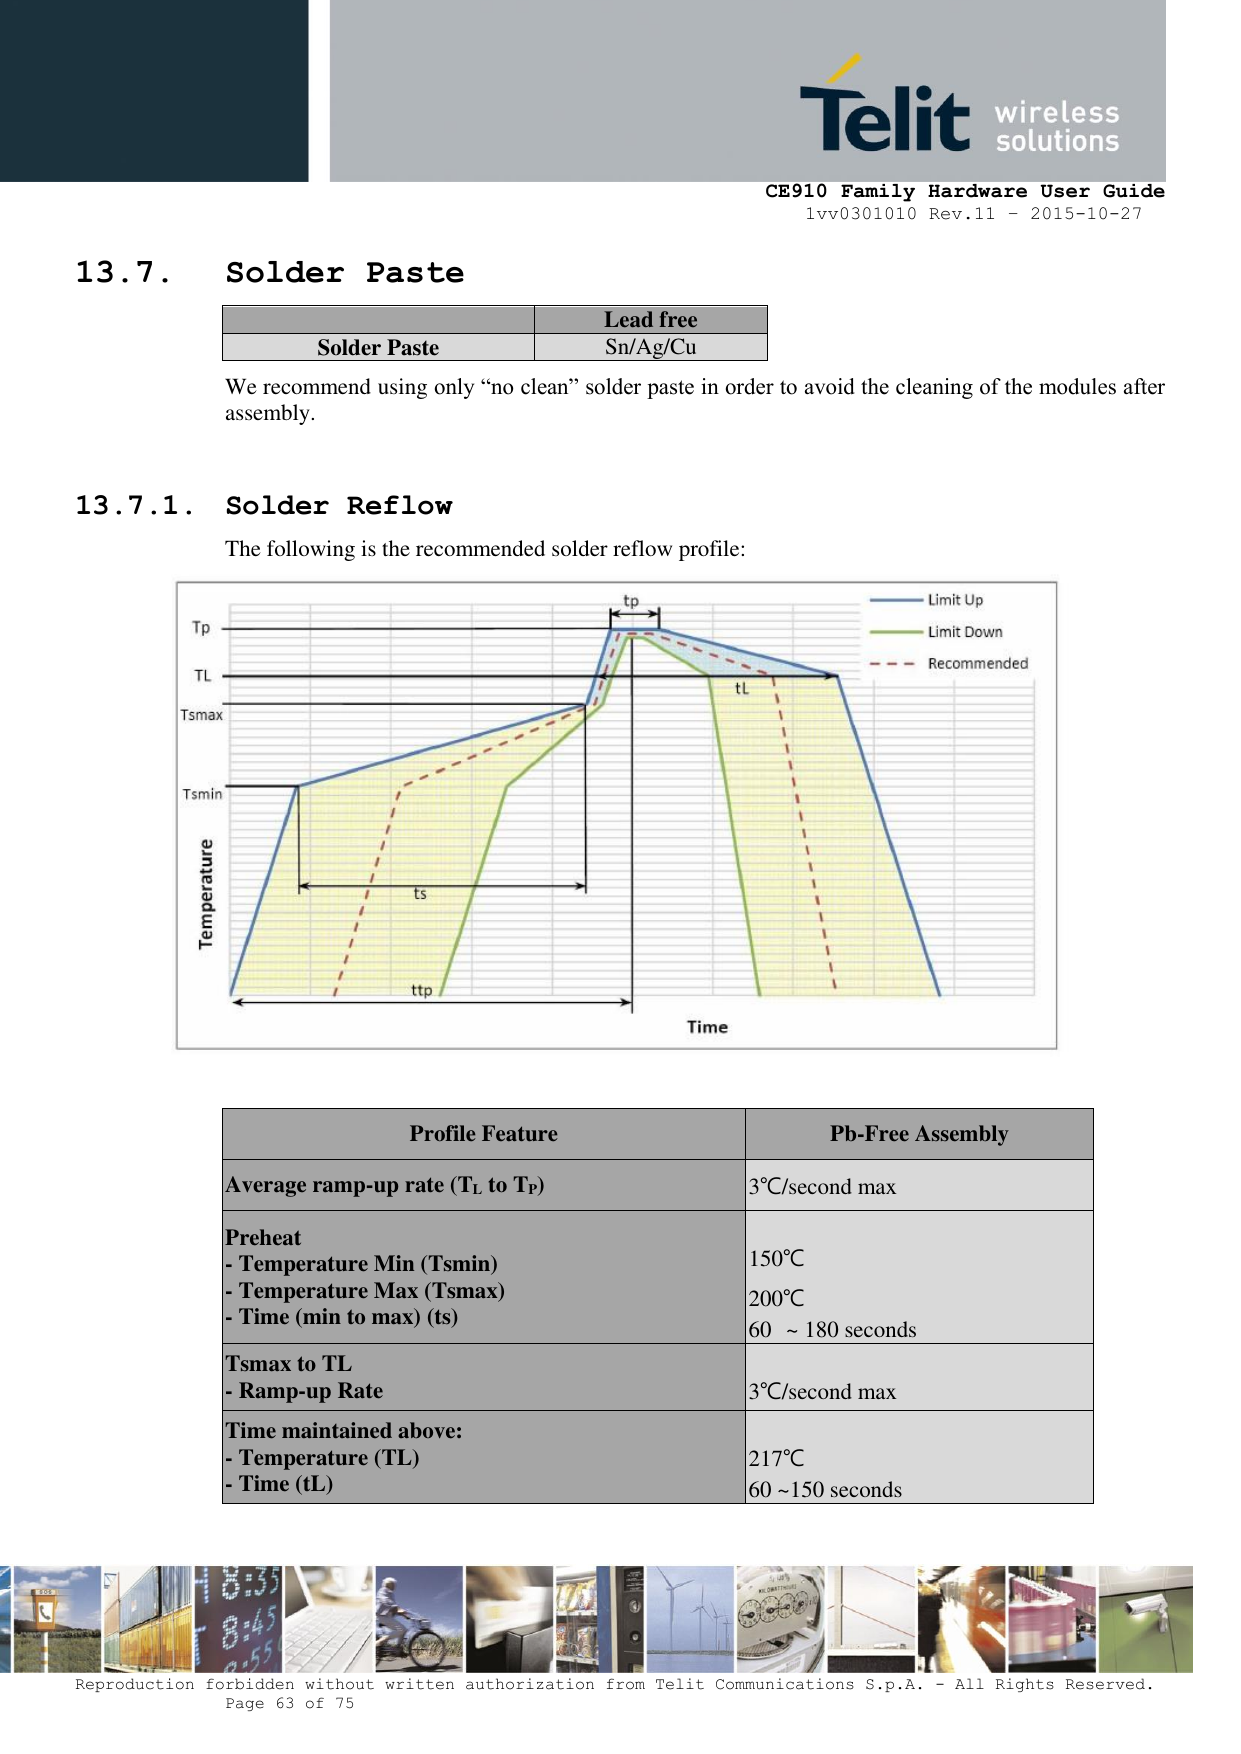     CE910 Family Hardware User Guide 1vv0301010 Rev.11 – 2015-10-27 Reproduction forbidden without written authorization from Telit Communications S.p.A. - All Rights Reserved.    Page 63 of 75                                                     13.7. Solder Paste  Lead free Solder Paste Sn/Ag/Cu We recommend using only “no clean” solder paste in order to avoid the cleaning of the modules after assembly.  13.7.1. Solder Reflow The following is the recommended solder reflow profile:   Profile Feature Pb-Free Assembly Average ramp-up rate (TL to TP) 3℃/second max Preheat - Temperature Min (Tsmin) - Temperature Max (Tsmax) - Time (min to max) (ts)  150℃ 200℃ 60 ~ 180 seconds Tsmax to TL - Ramp-up Rate  3℃/second max Time maintained above: - Temperature (TL) - Time (tL)  217℃ 60 ~150 seconds 